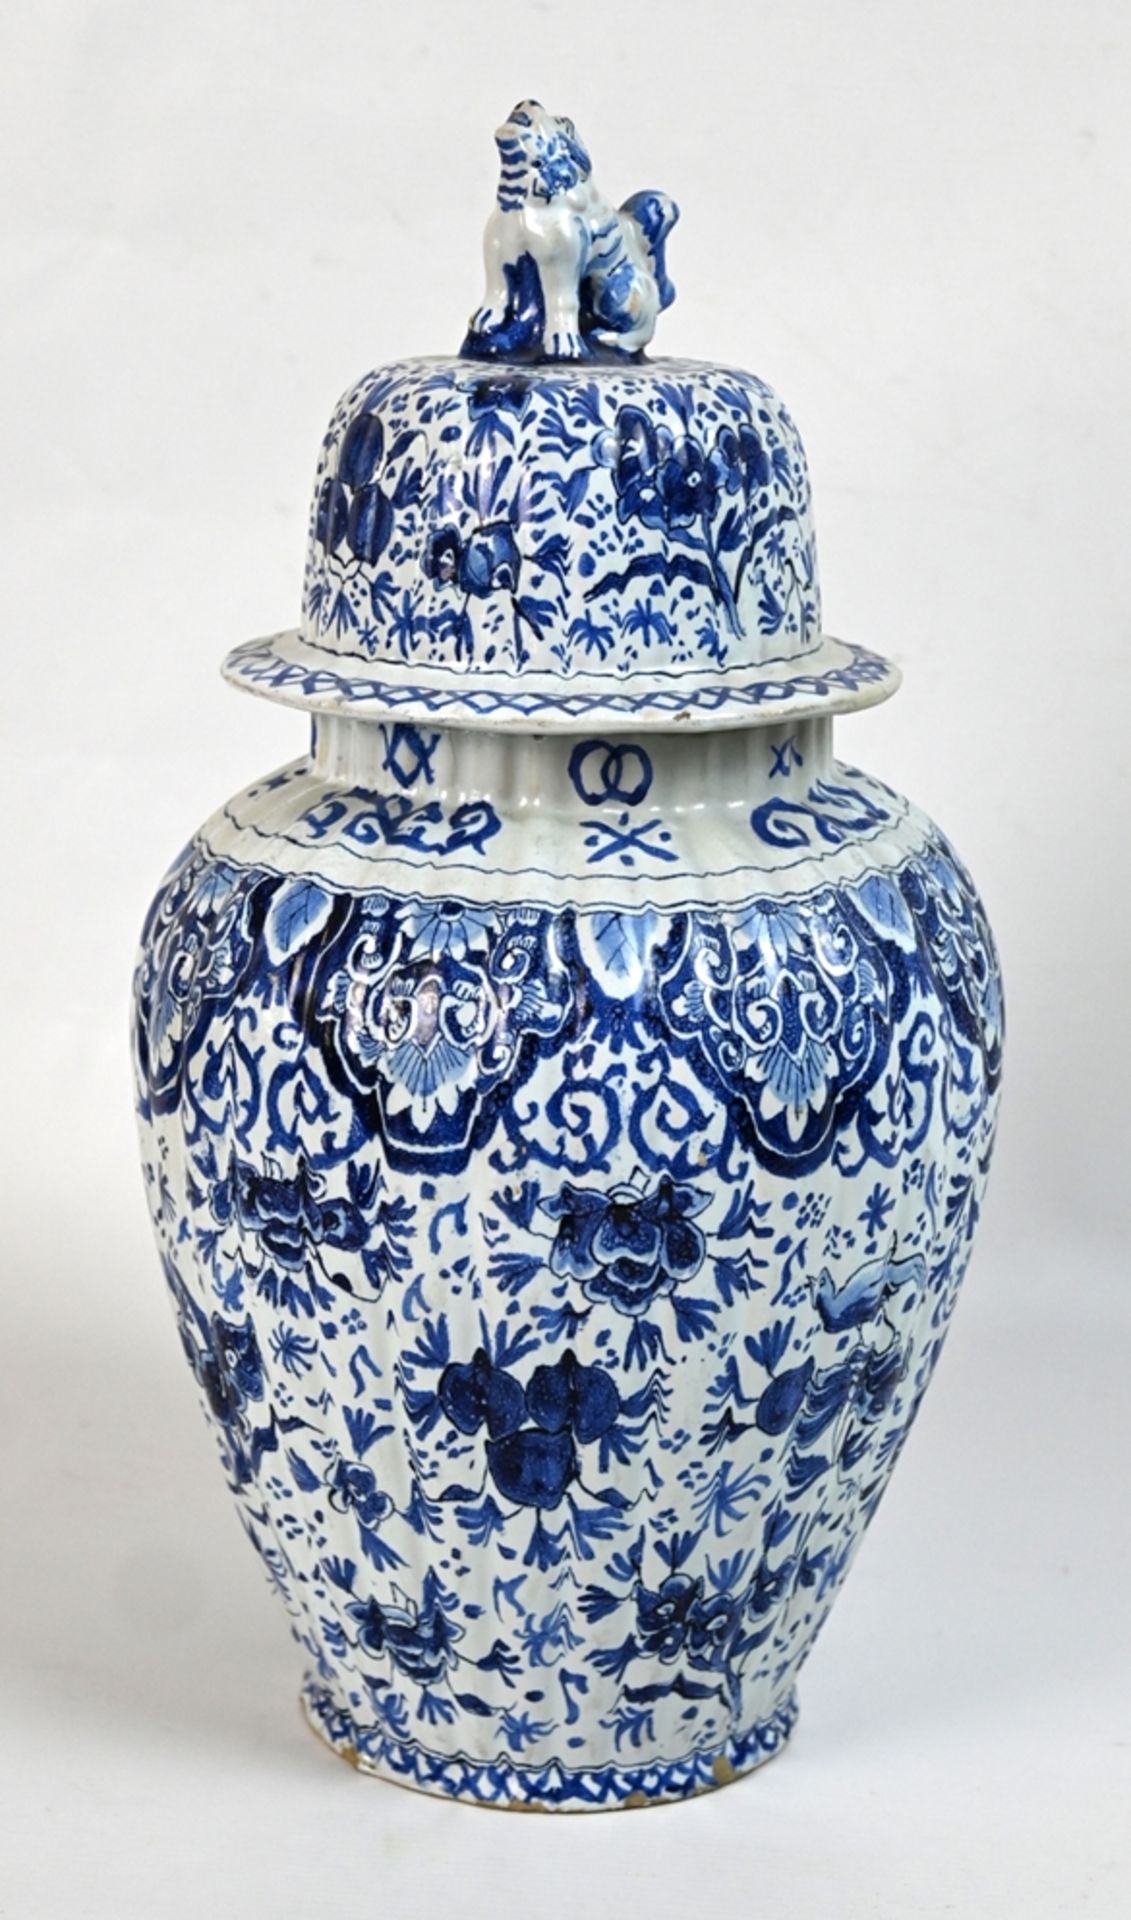 Lidded vase from Delft, around 1710/20. Blue painting with stylised flowers, fruit and birds. - Image 2 of 4